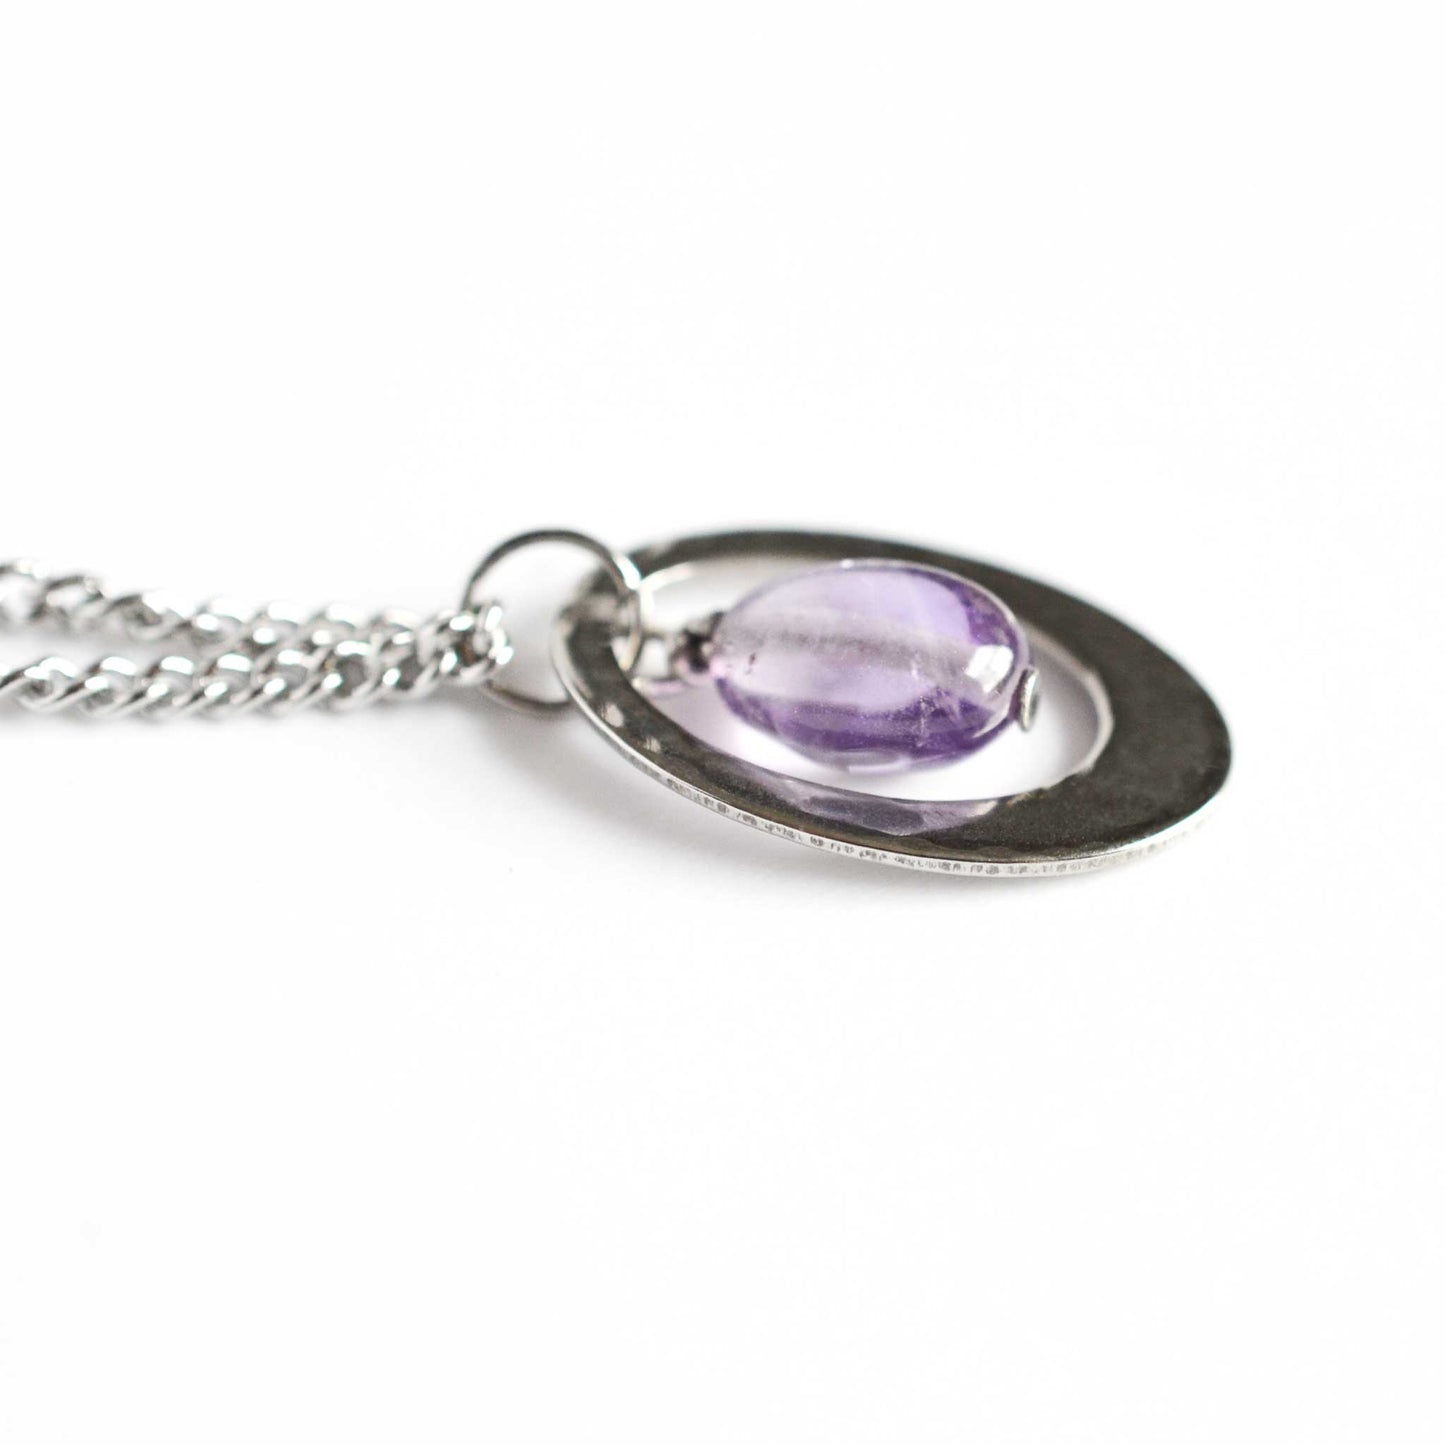 Close up view of Amethyst oval pendant necklace on stainless steel curb chain.